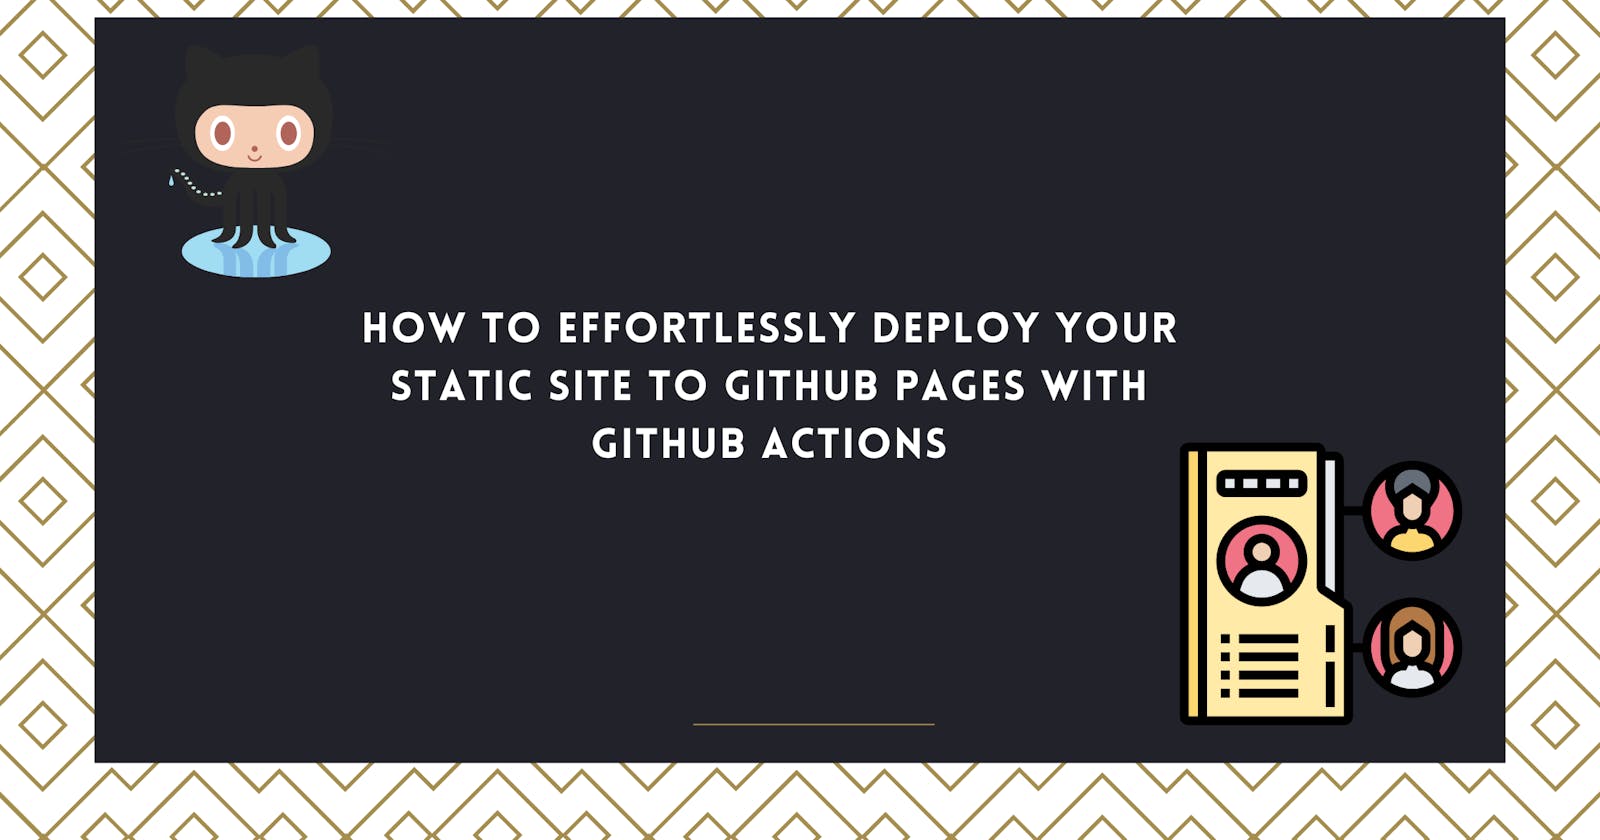 How to Effortlessly Deploy Your Static Site to GitHub Pages with GitHub Actions.